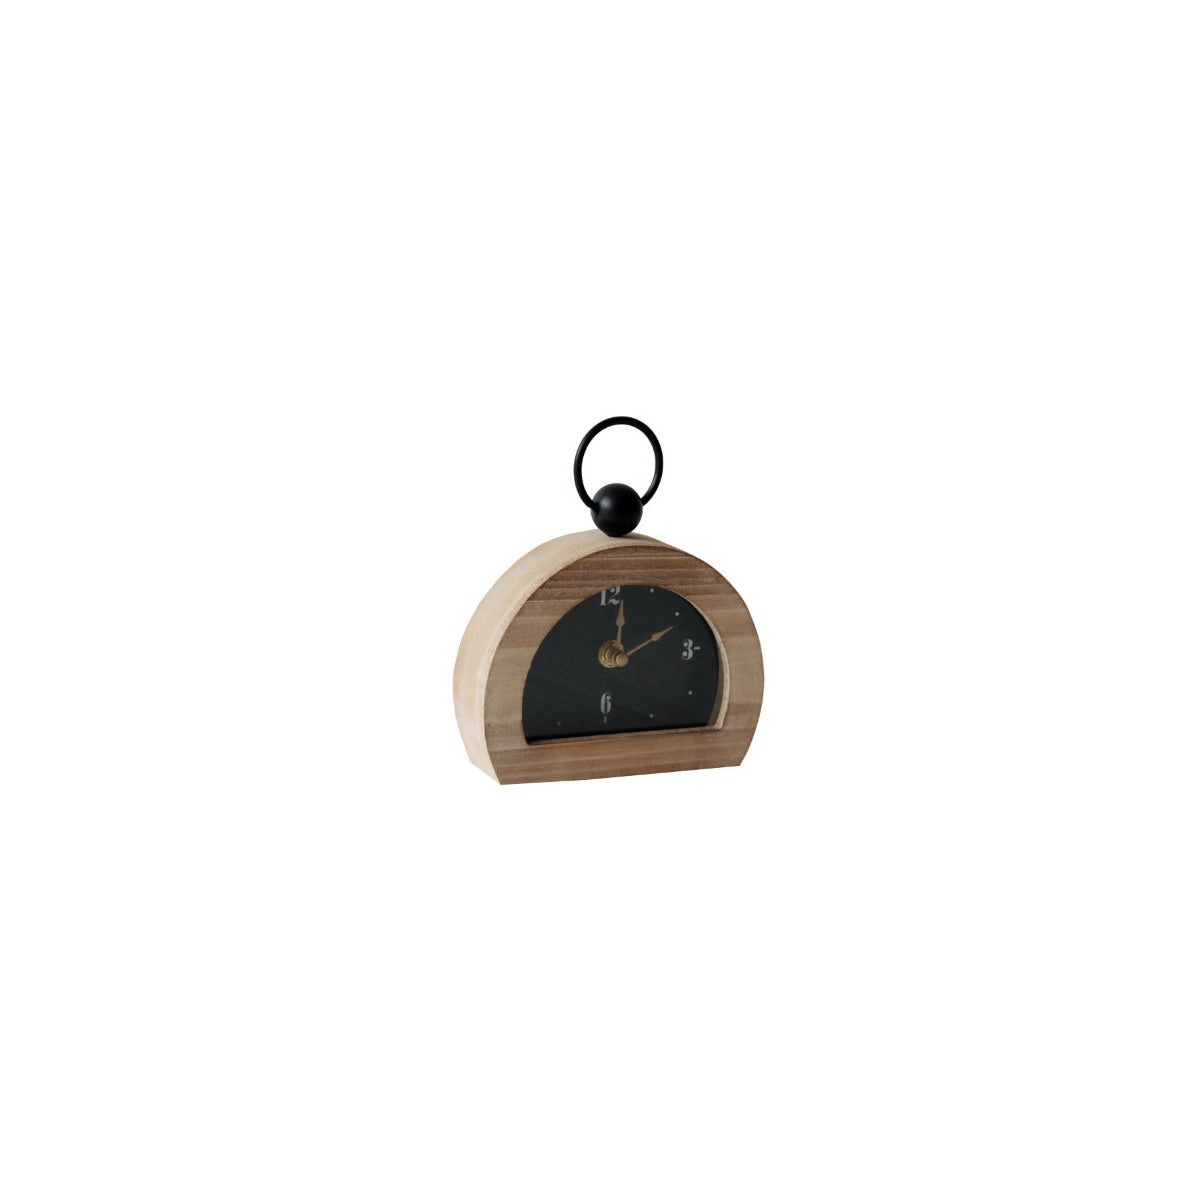 Arch Table Clock w/ Ring